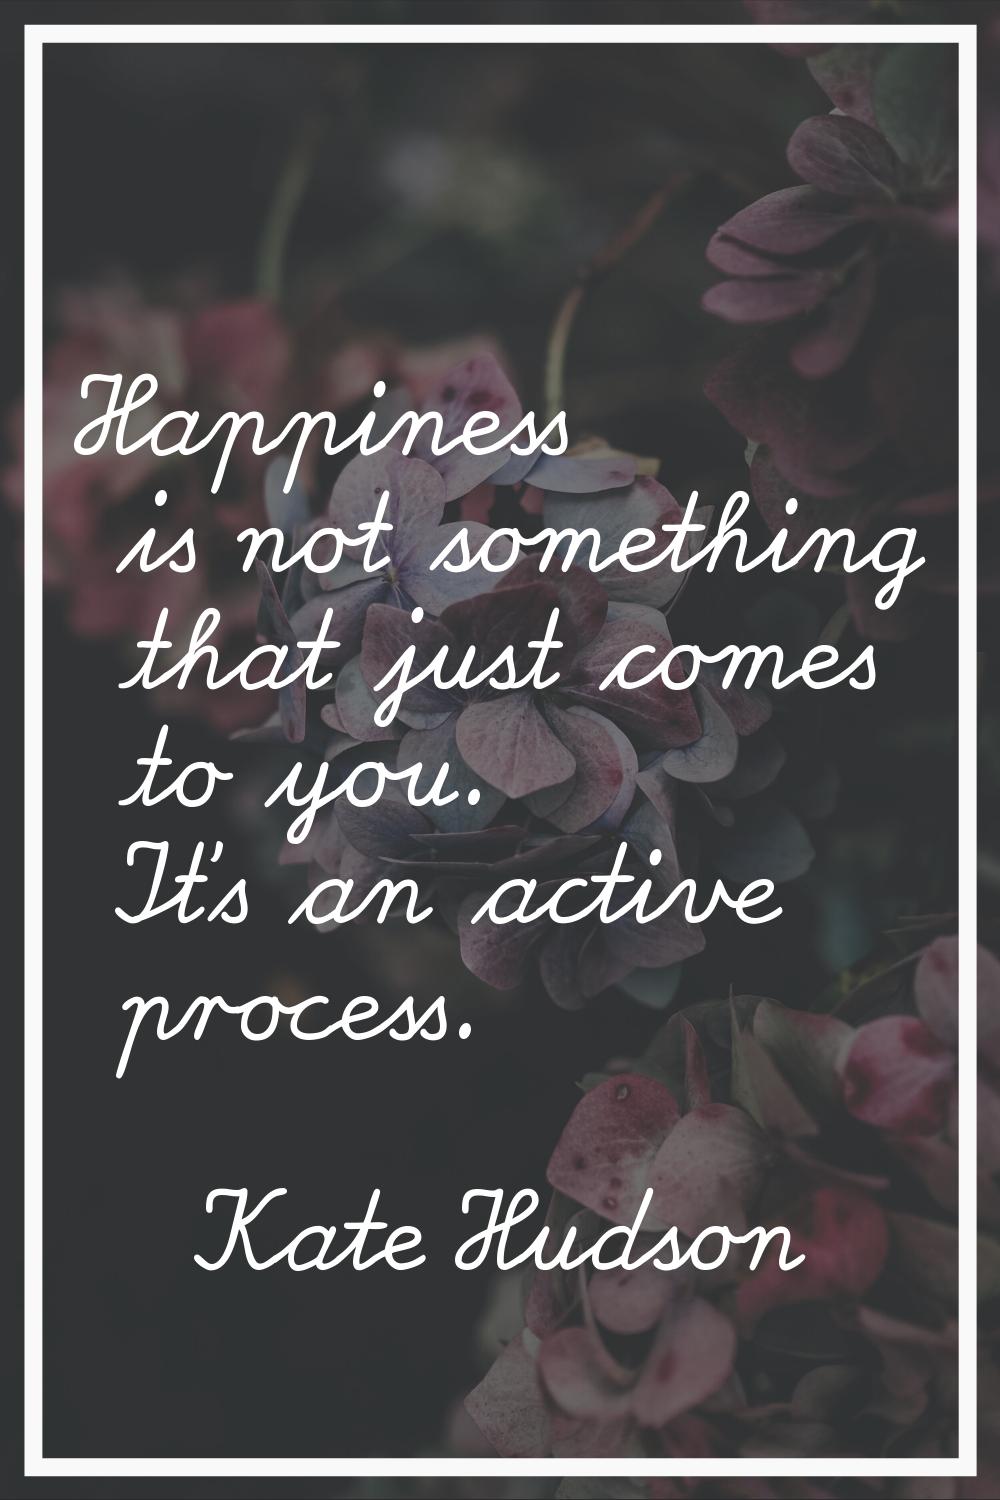 Happiness is not something that just comes to you. It's an active process.